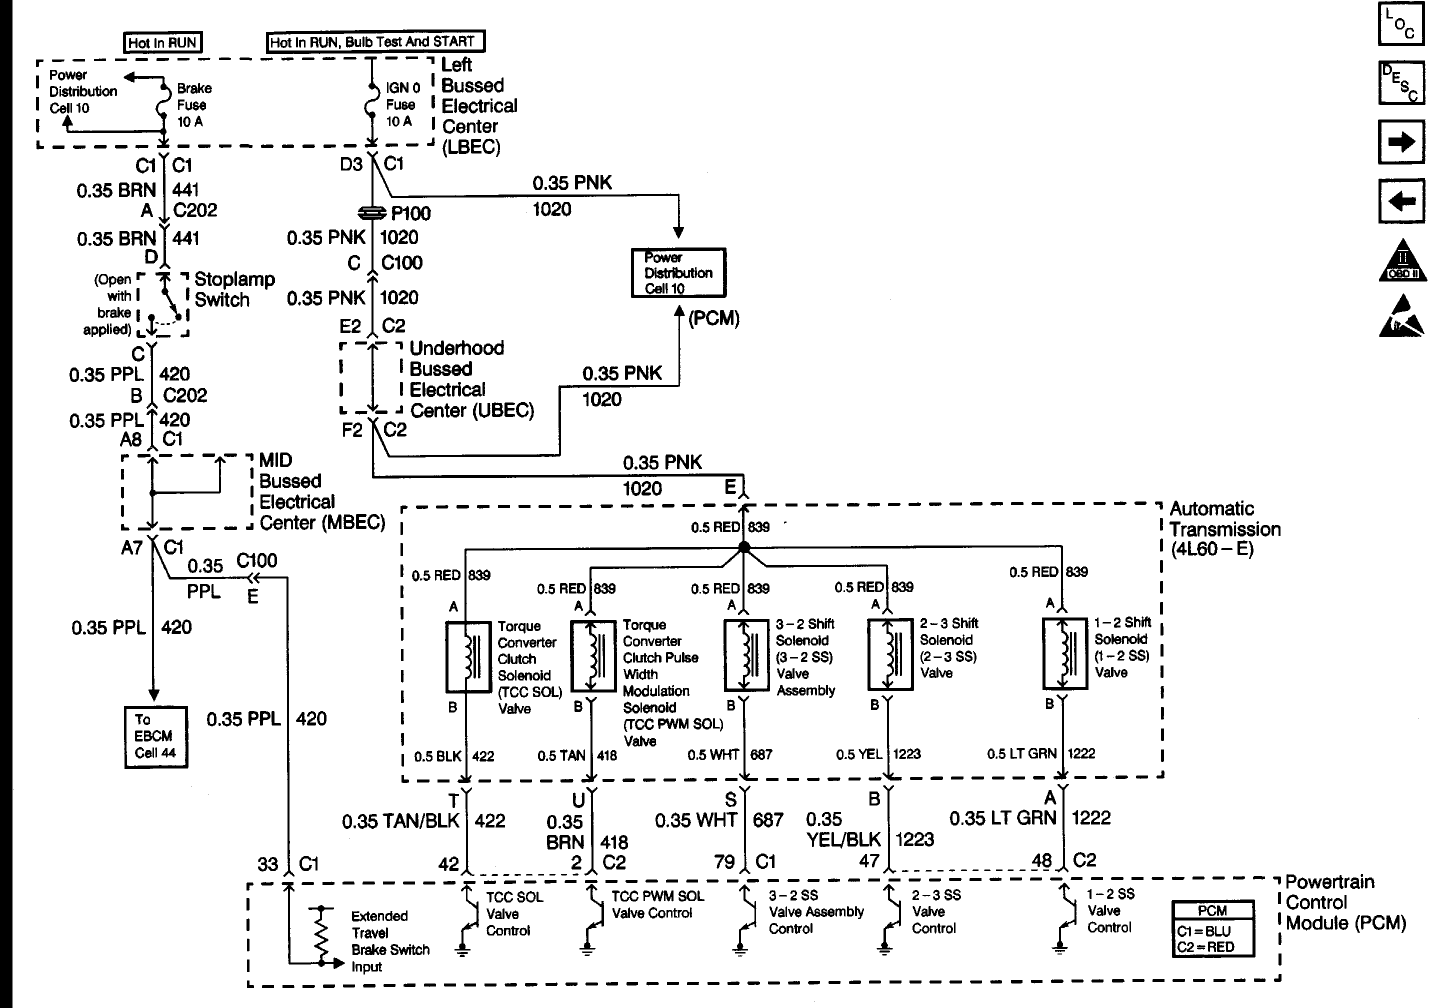 Wiring Schematic For 1999 Gmc Sierra 1500  Specifically Up And Down